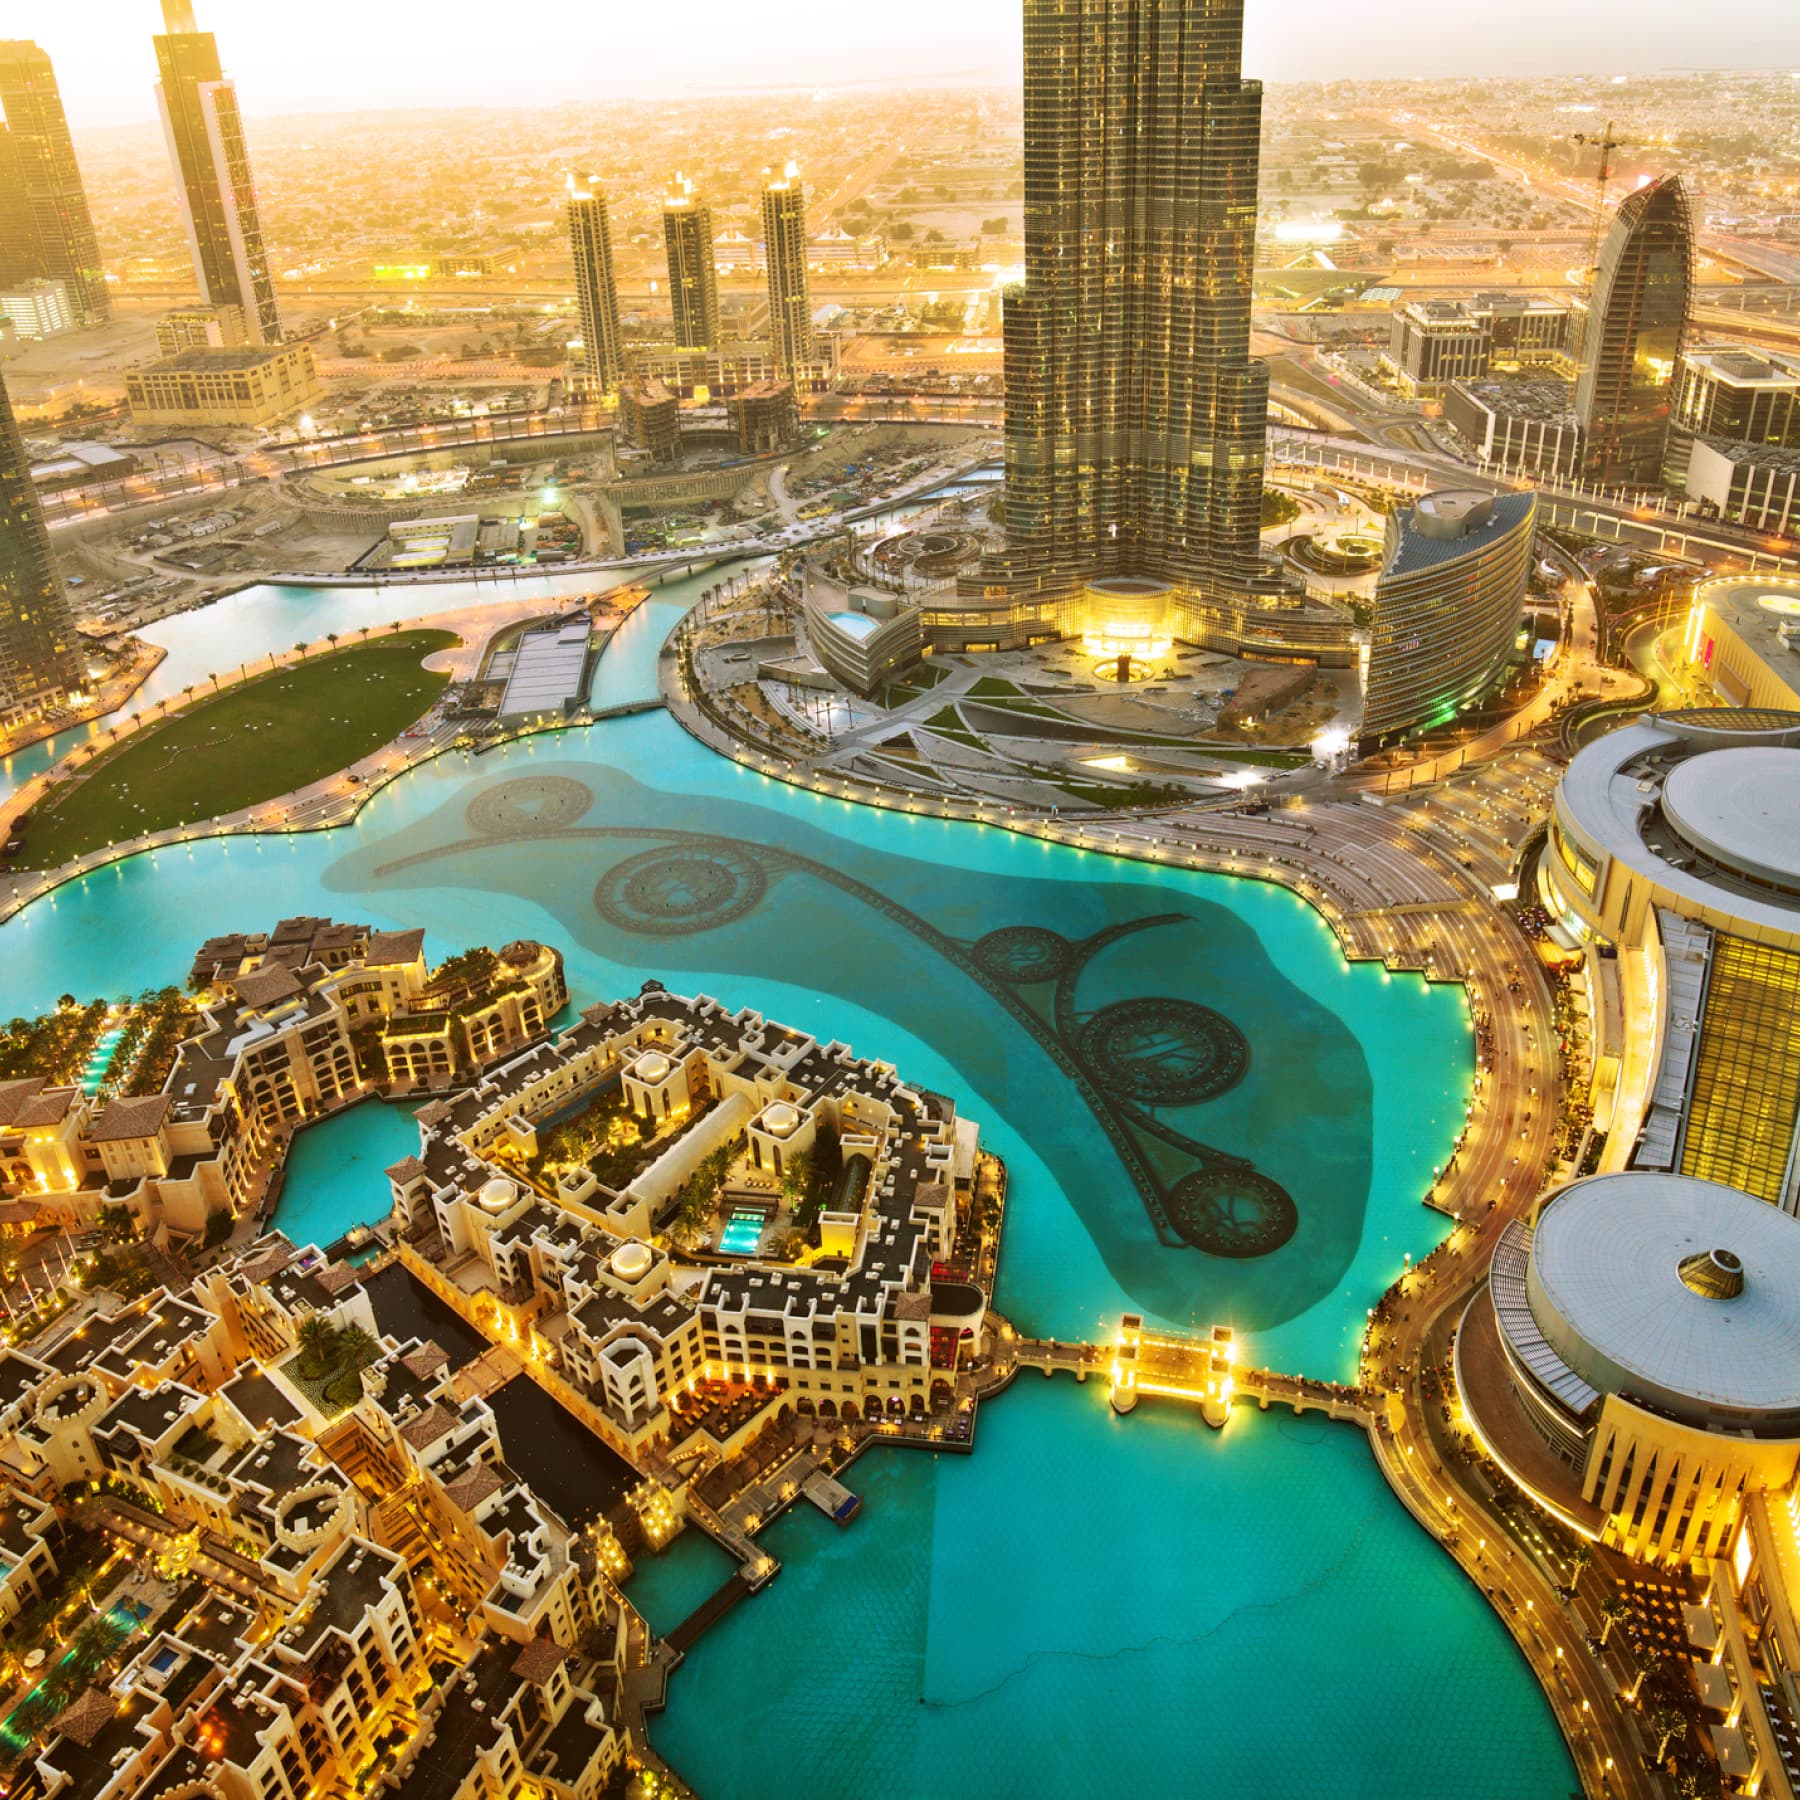 Looking for child friendly options for half term breaks? Dubai could be the answer